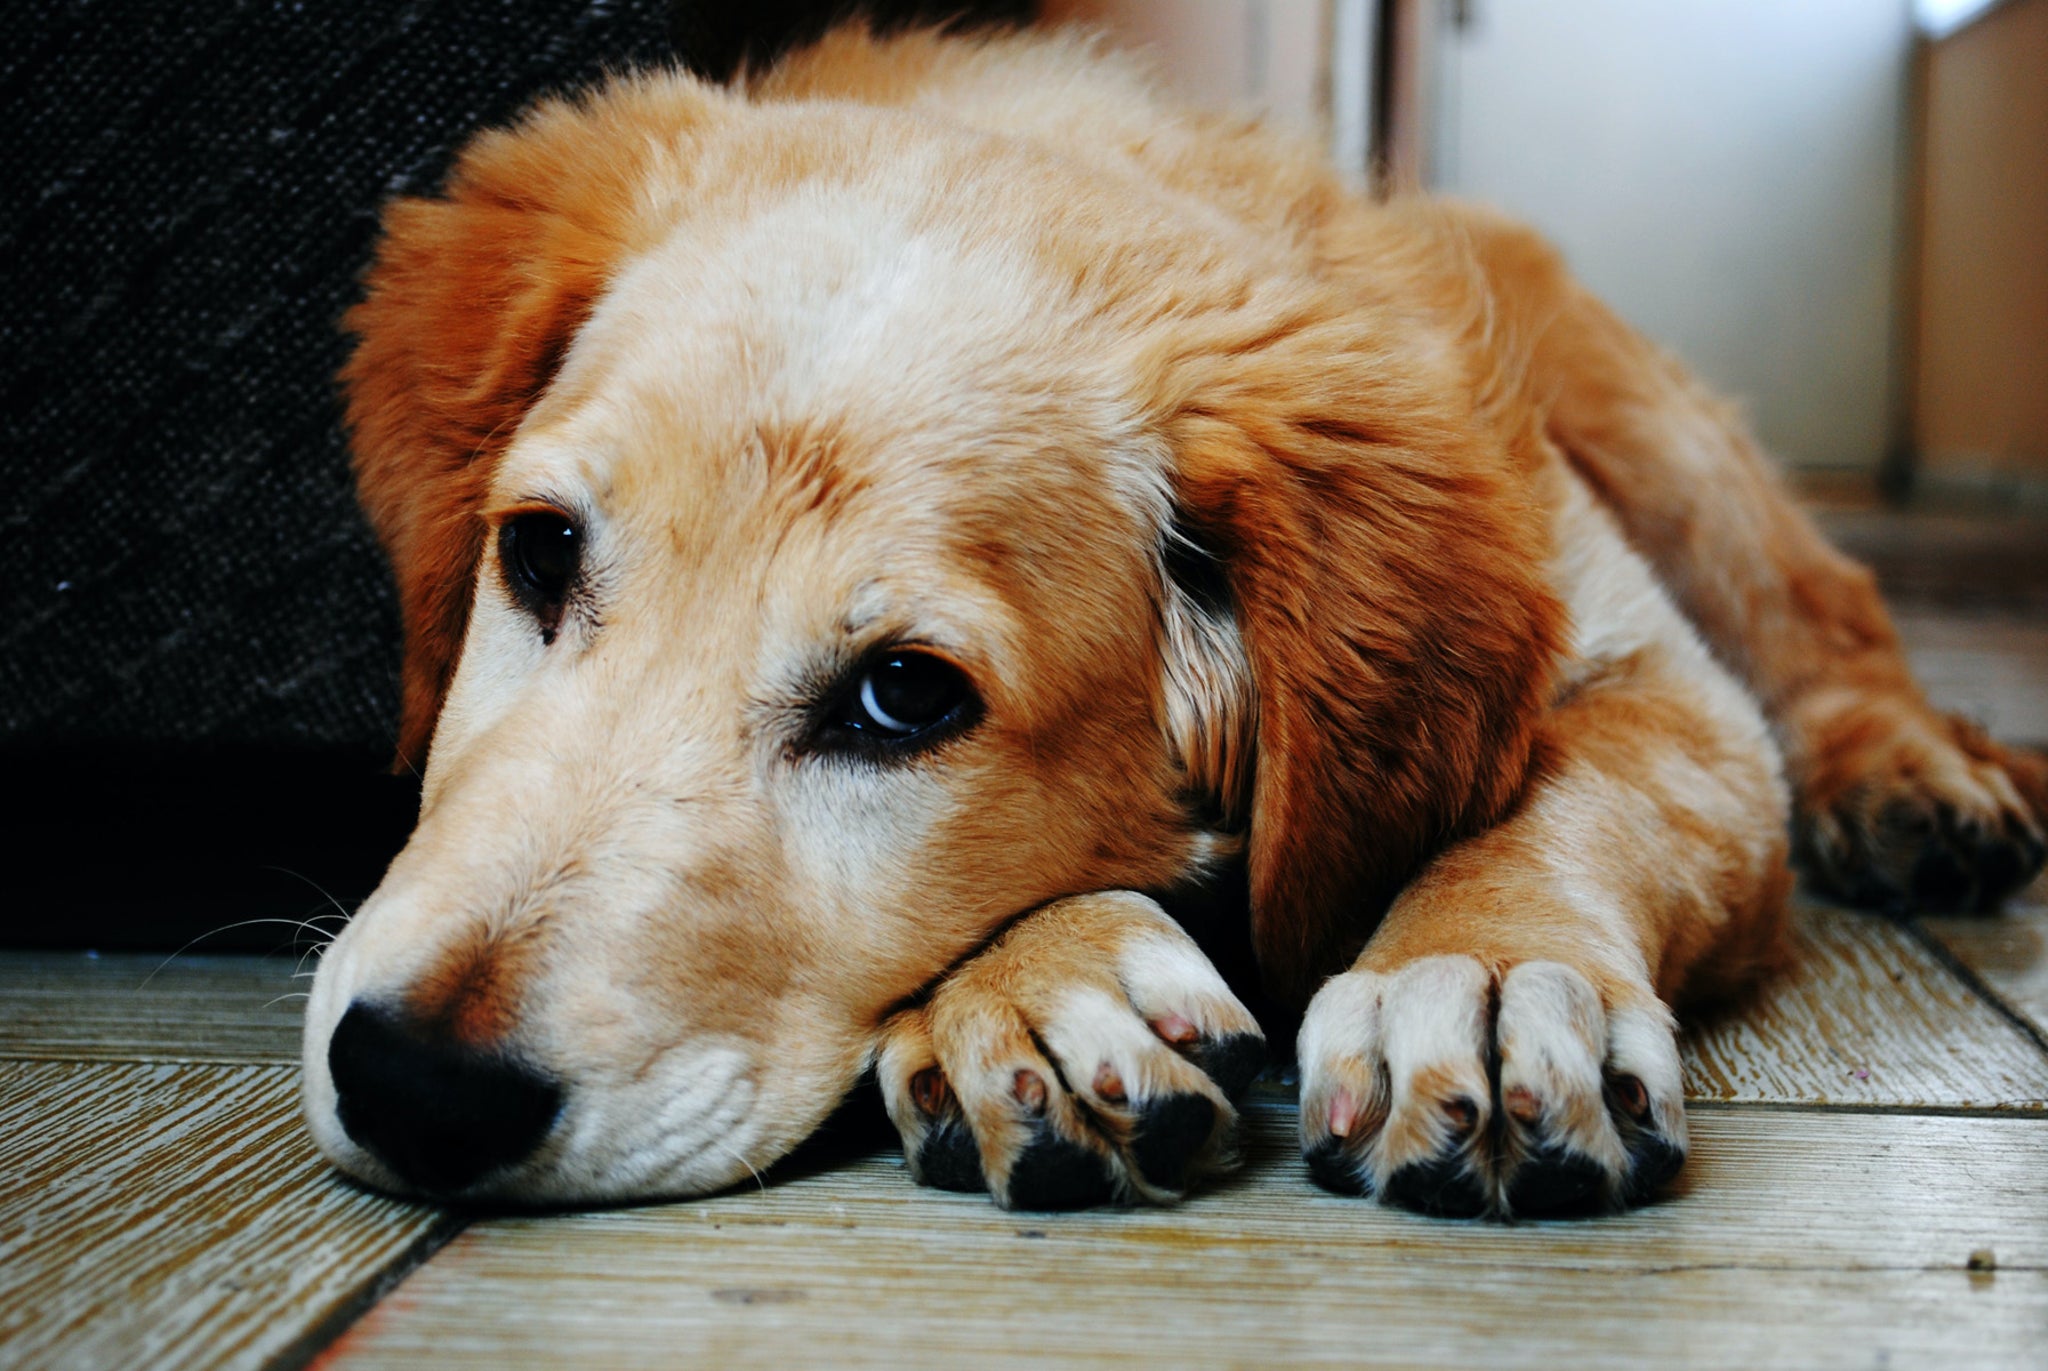 067_golden_retriever_laying_on_ground_face_between_paws.jpg